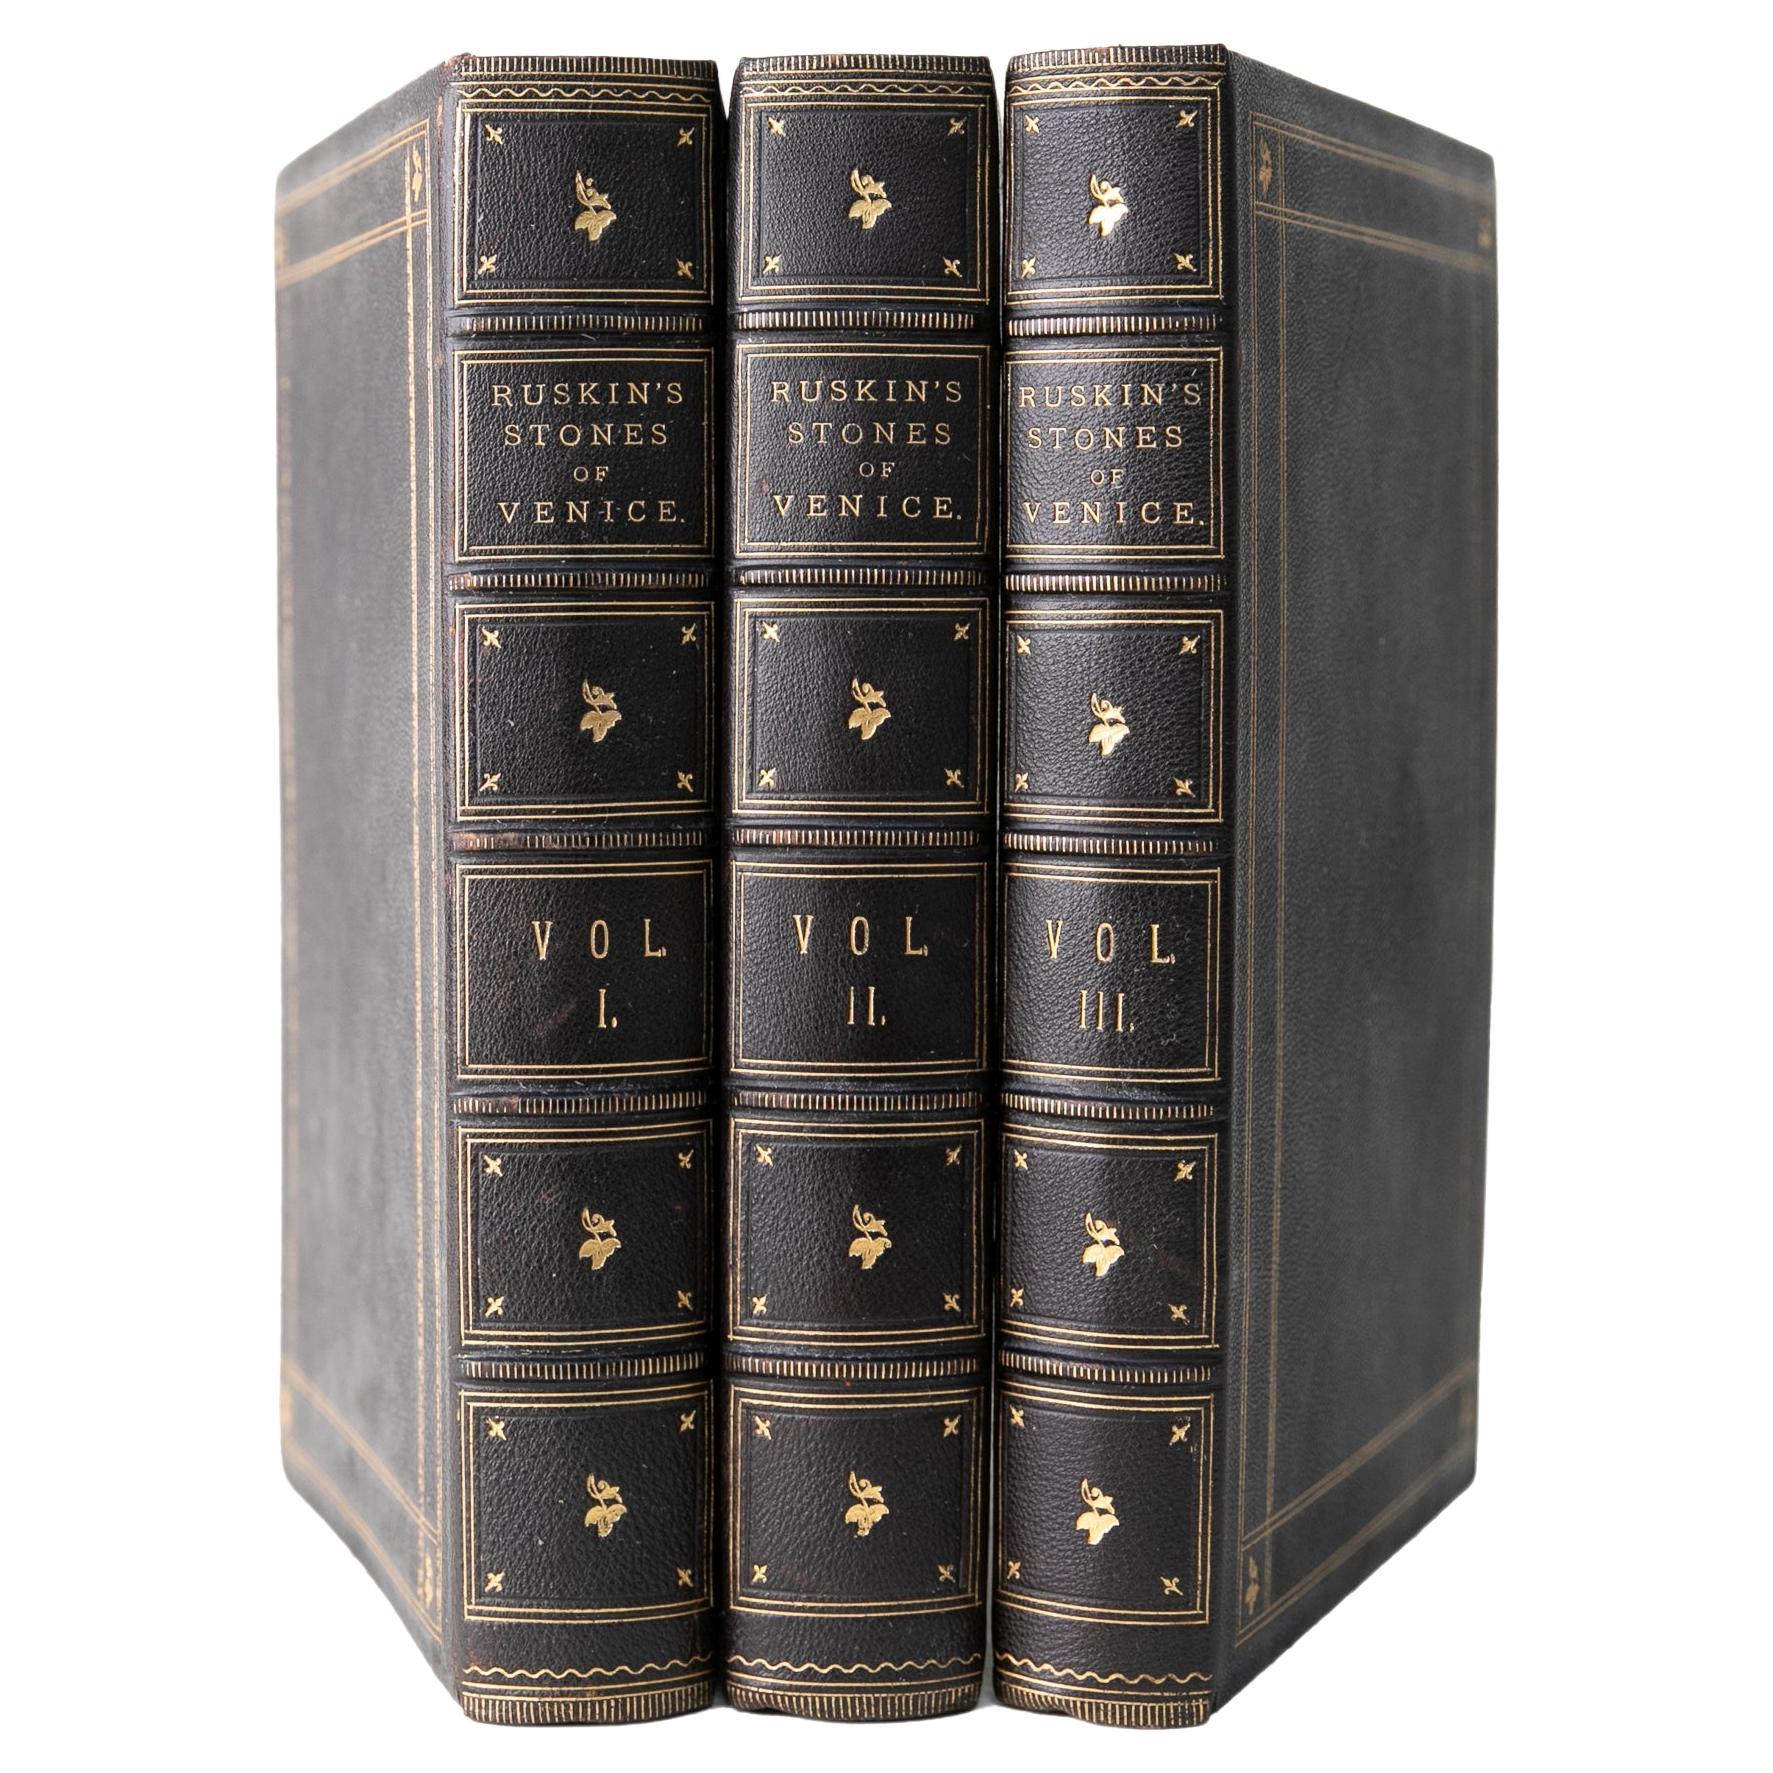 3 Volumes. John Ruskin, The Stones of Venice. For Sale